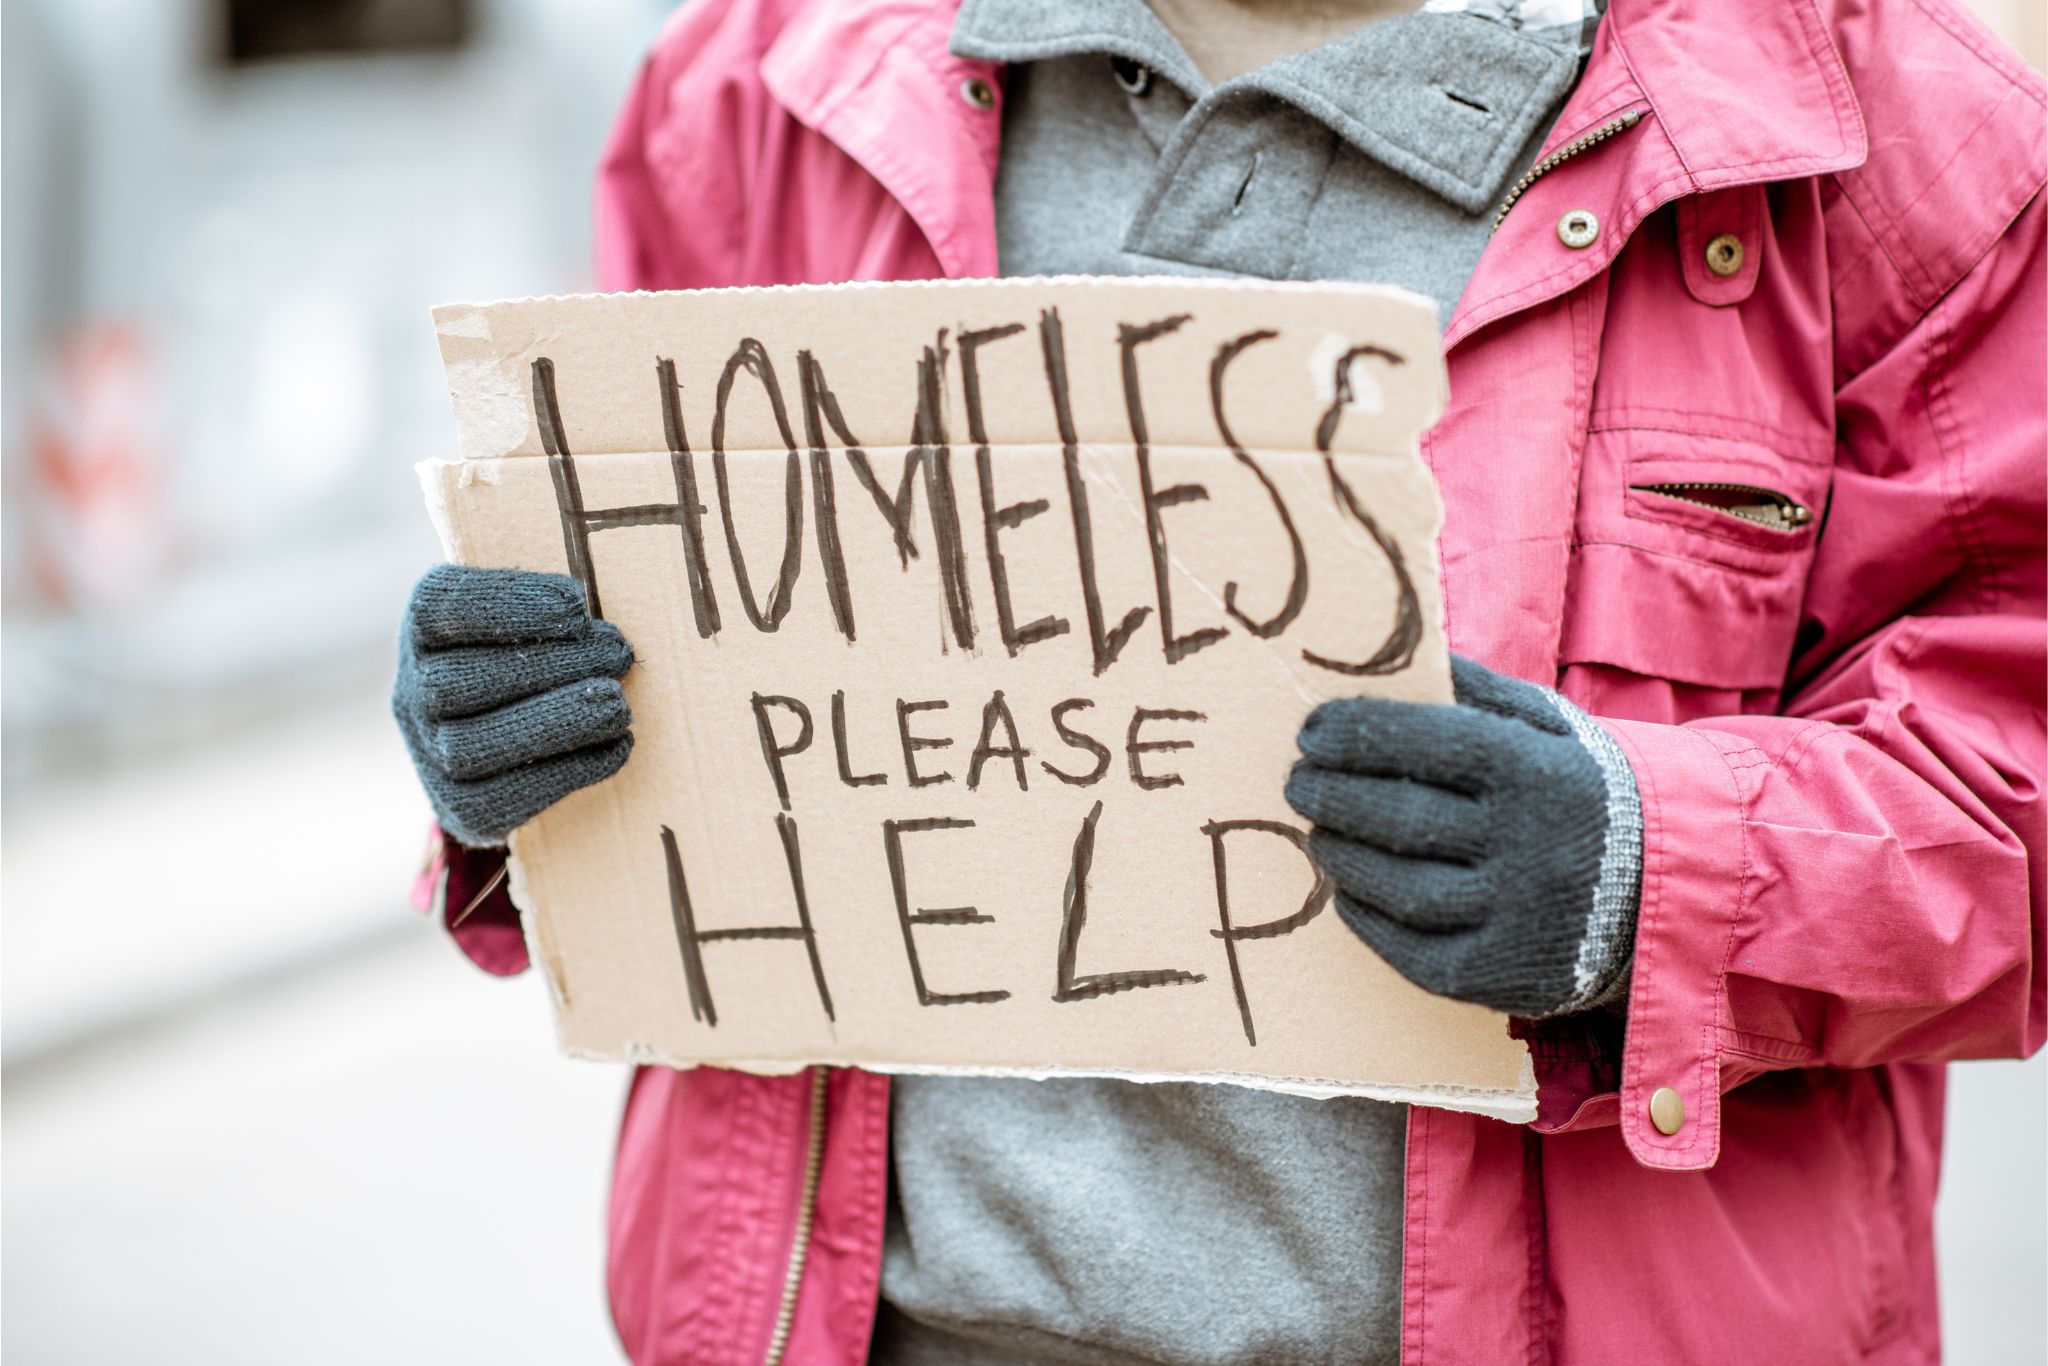 A Homelessness Crisis In The UK